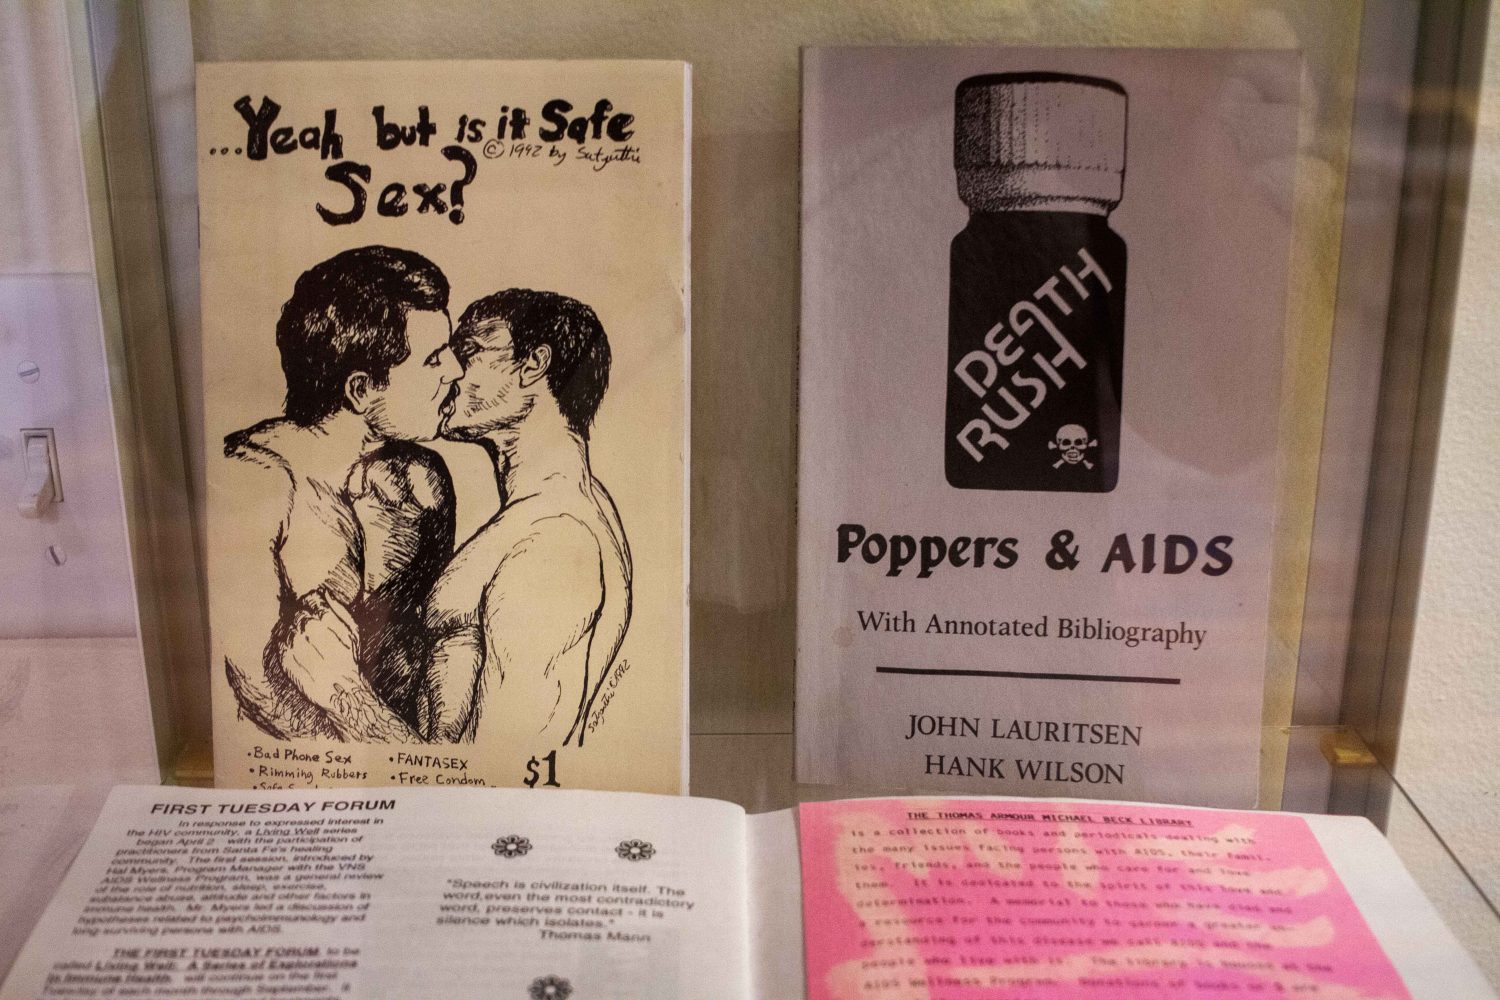 A collection of publications about HIV/AIDS, safe sex, and drug use, on display at Open Book in Minneapolis, on Wednesday, Nov. 29, 2023. (Photo/Adria Carpenter)